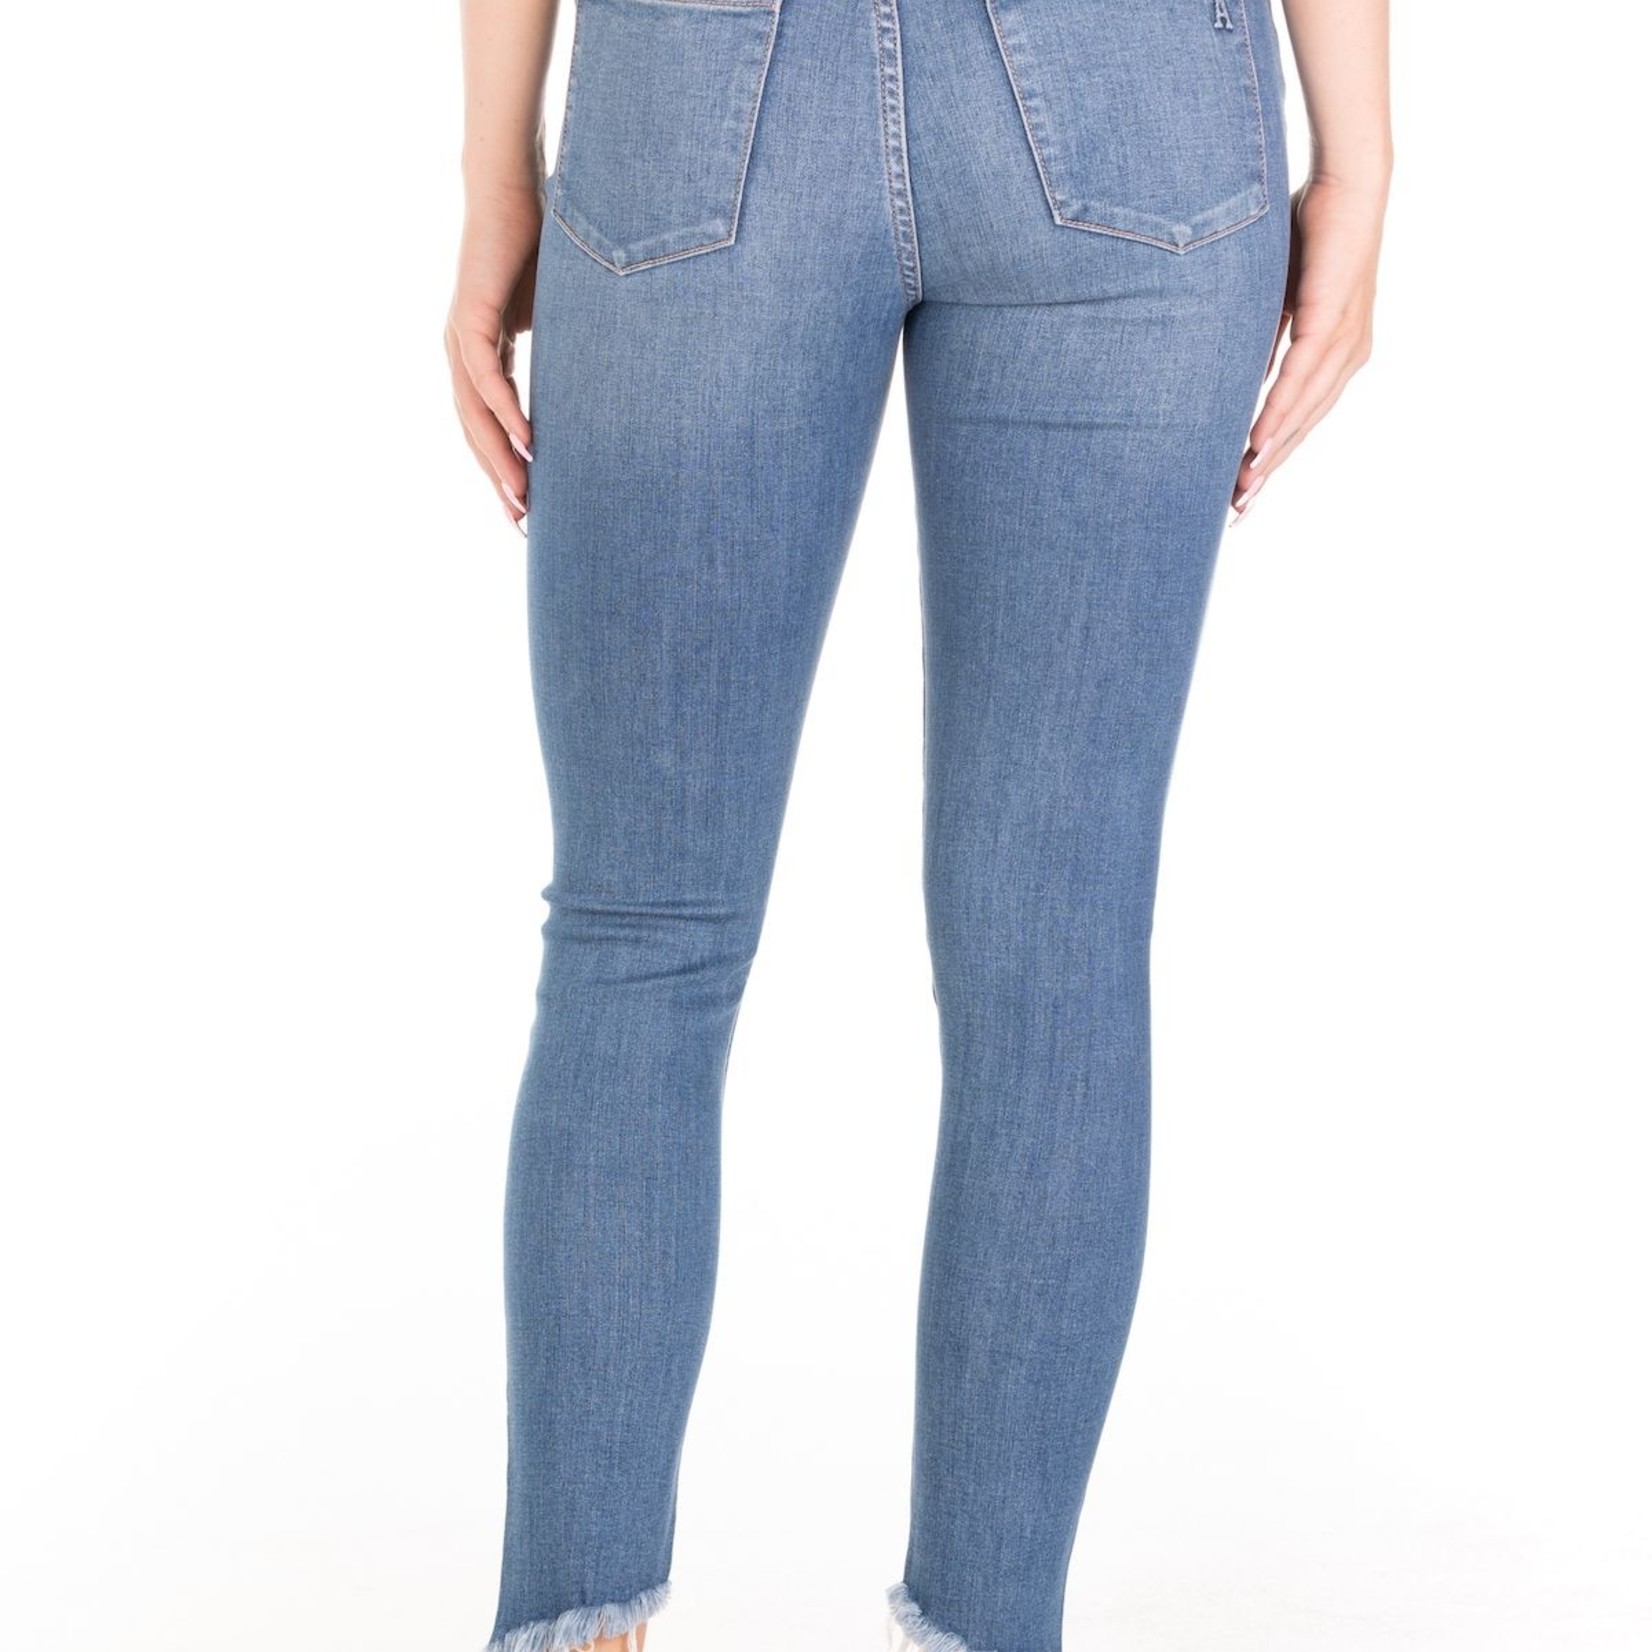 Articles Of Society Articles of Society Suzy Jeans